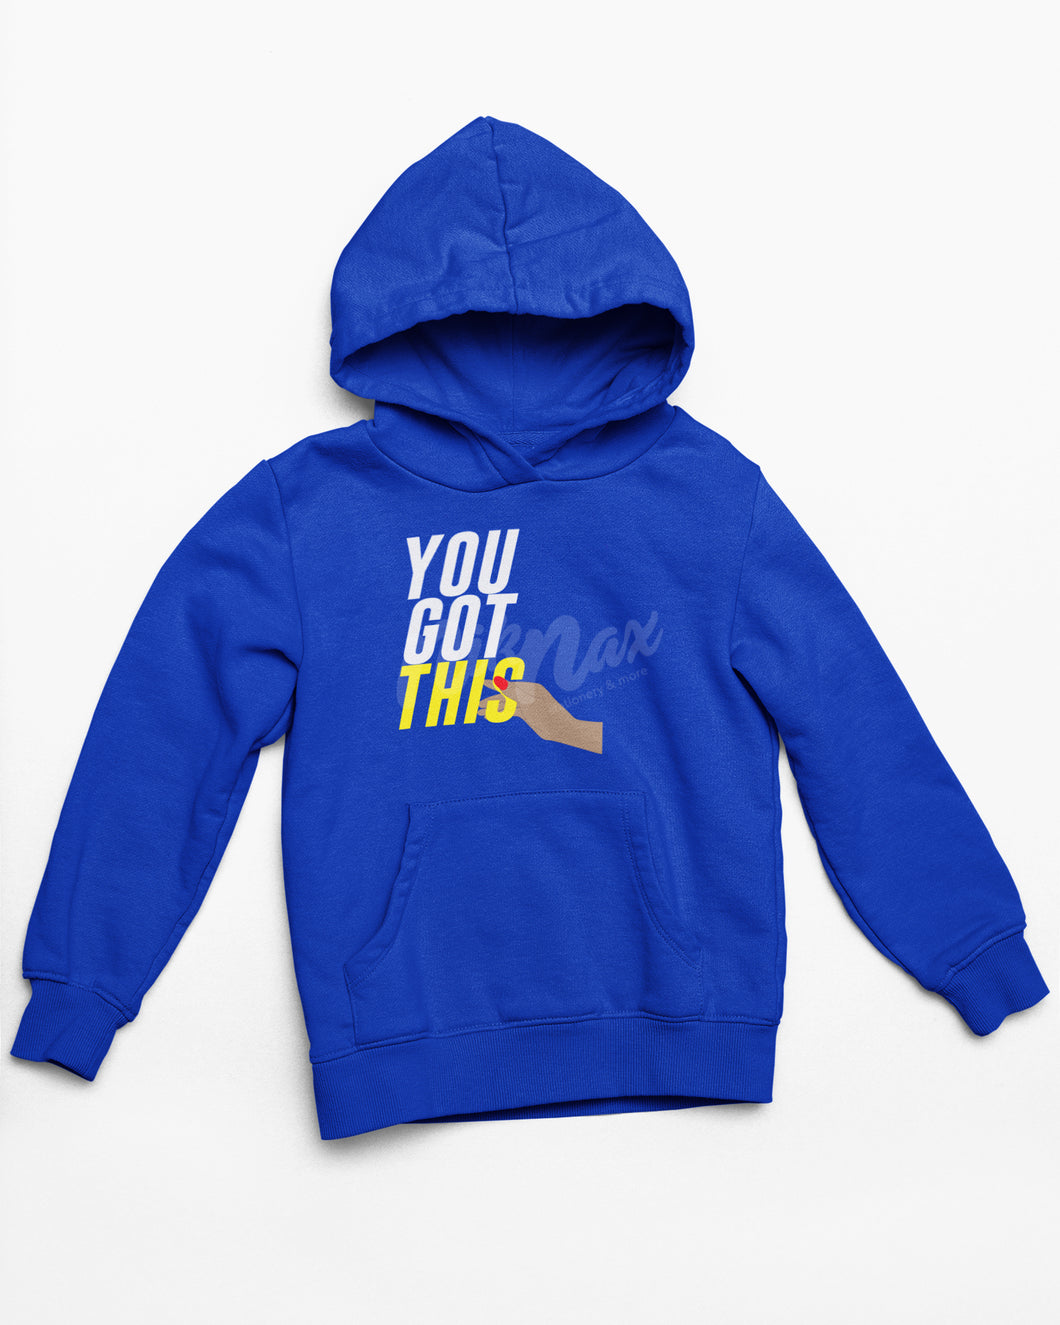 YOU GOT THIS HOODIE (MULTIPLE COLORS AVAILABLE)